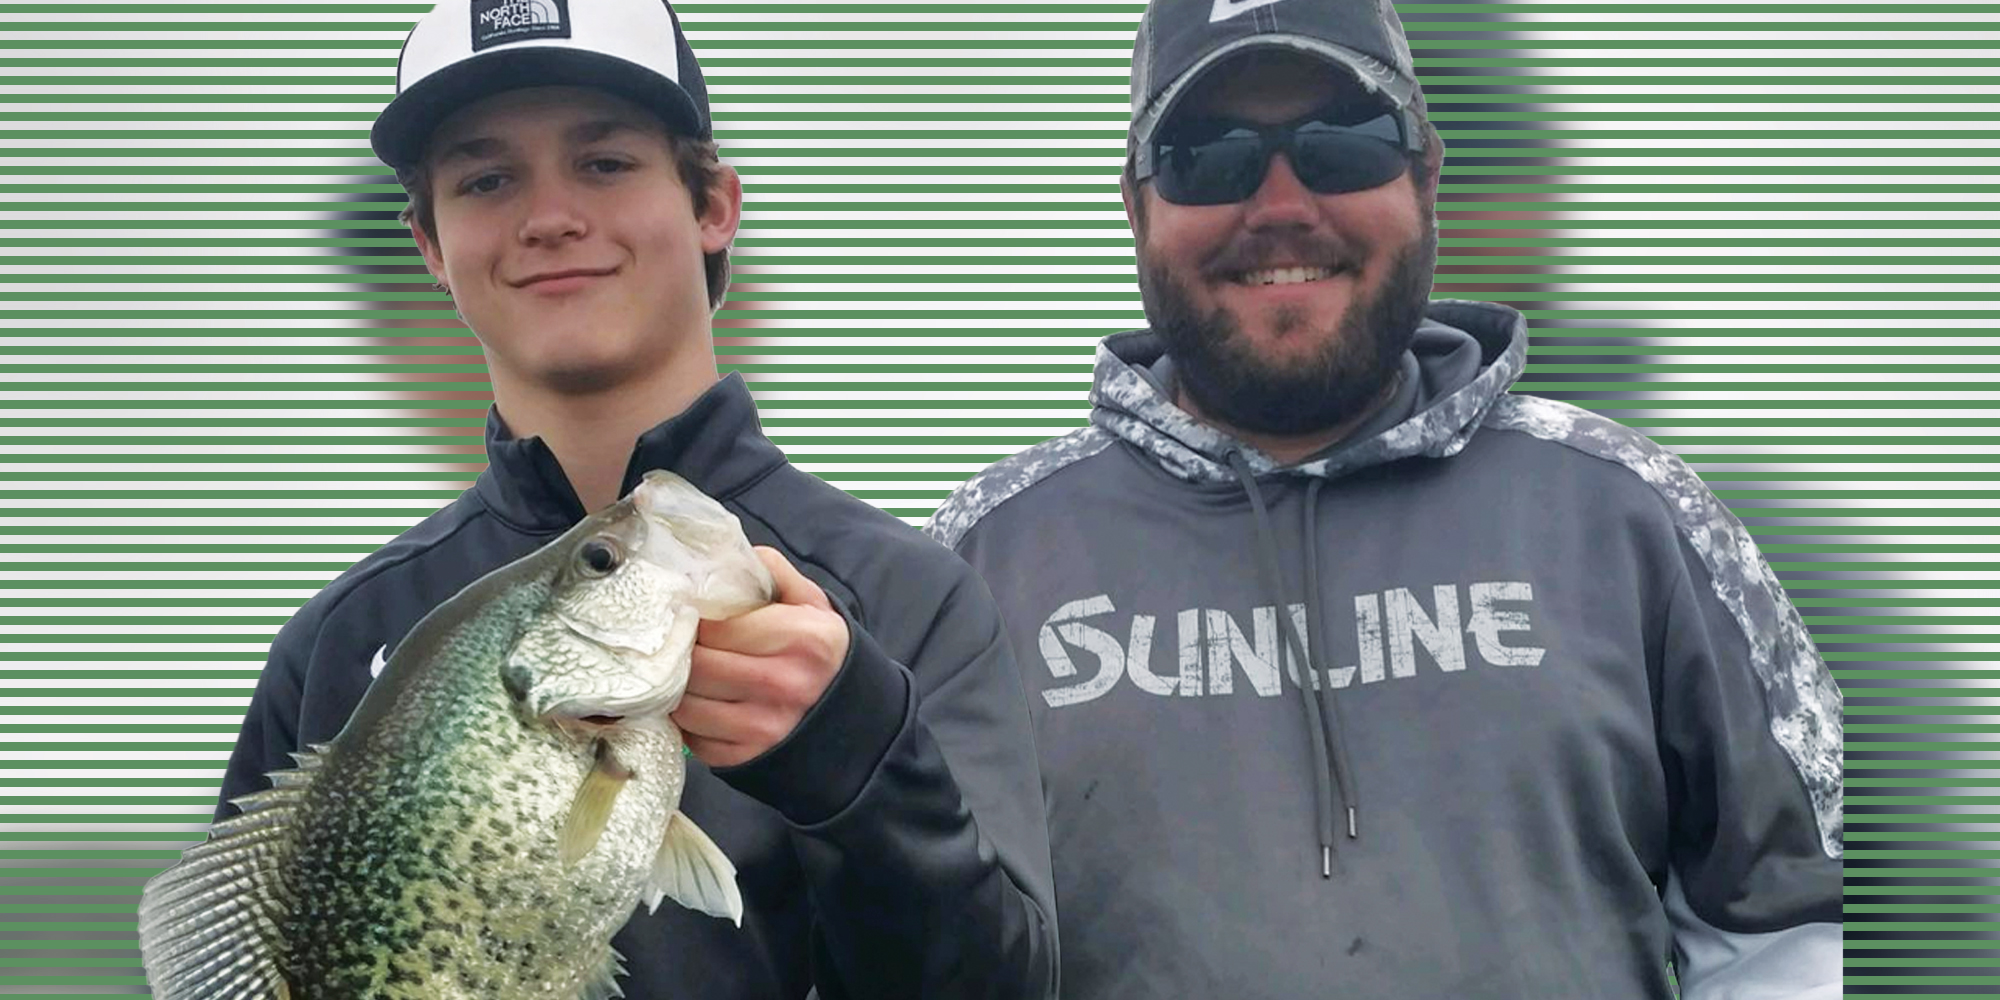 Target GIANT Crappie with BIG Spoons This Winter 